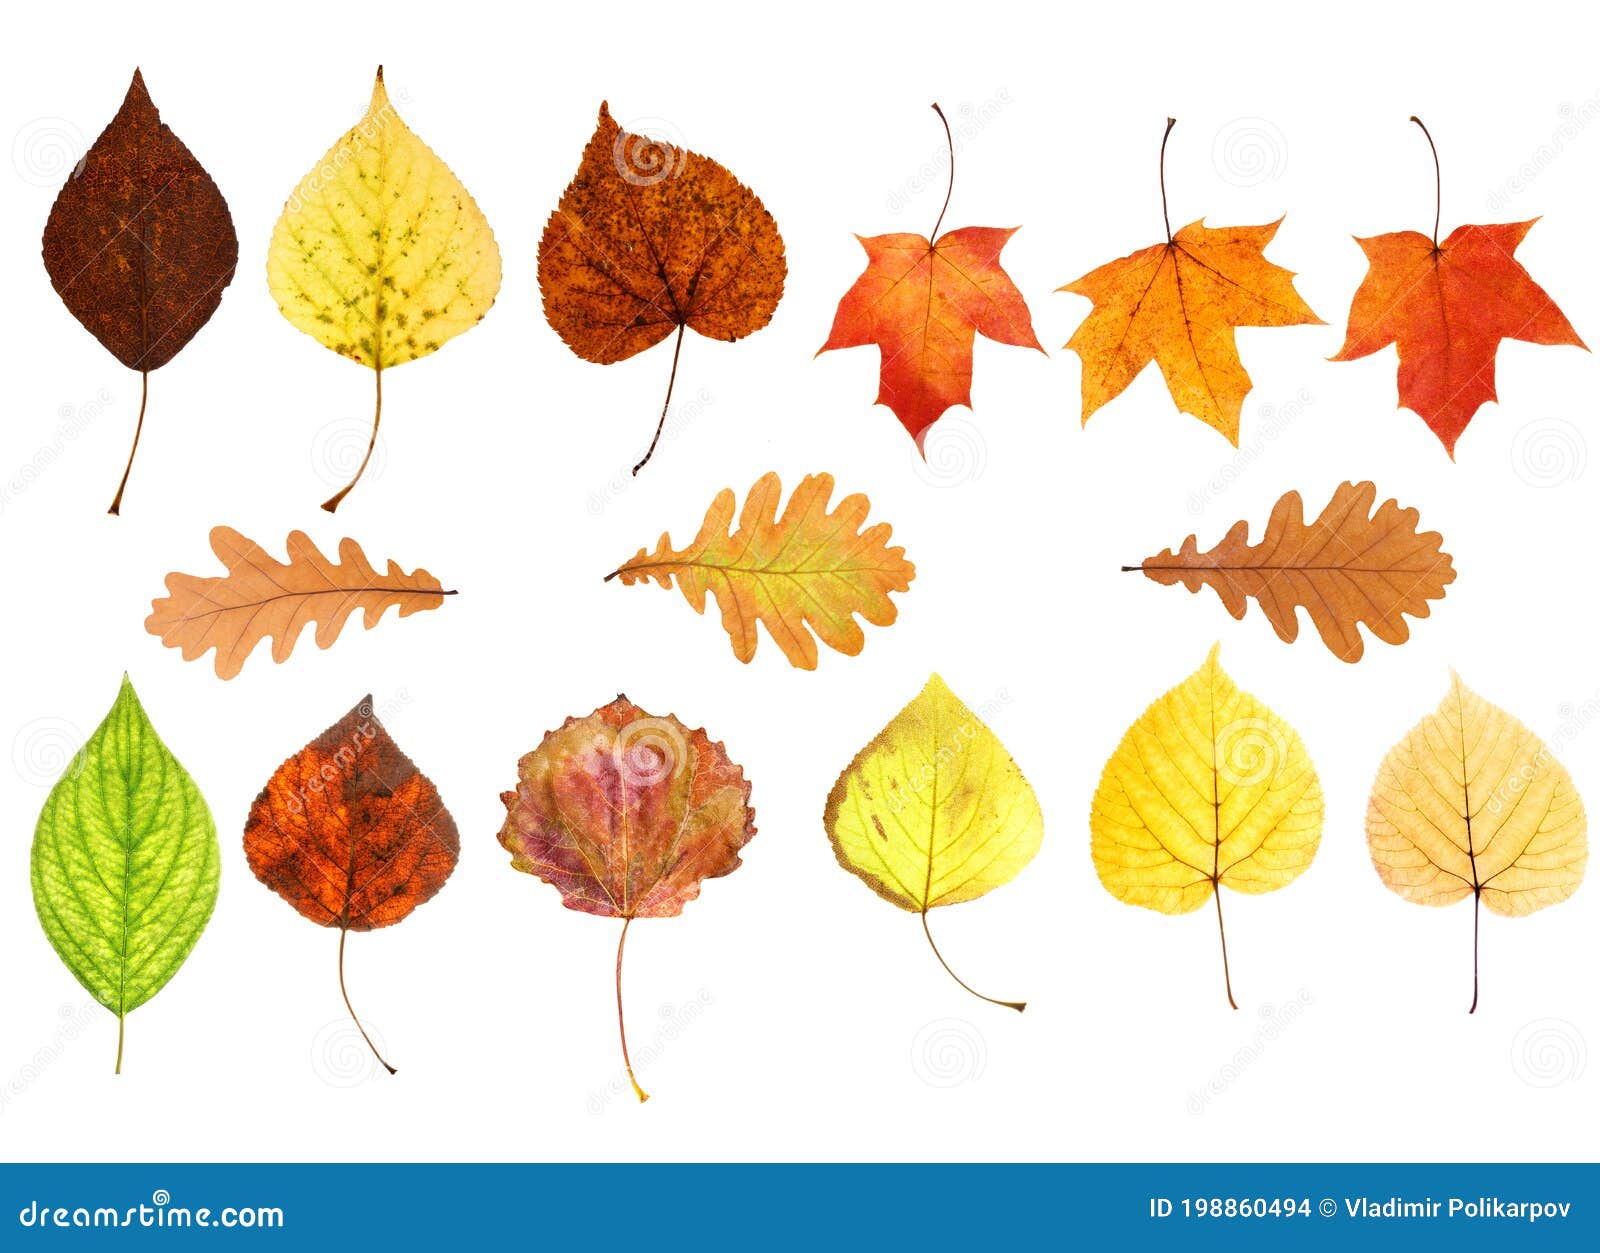 Collection of Beautiful Autumn Leaves Isolated on White Background ...